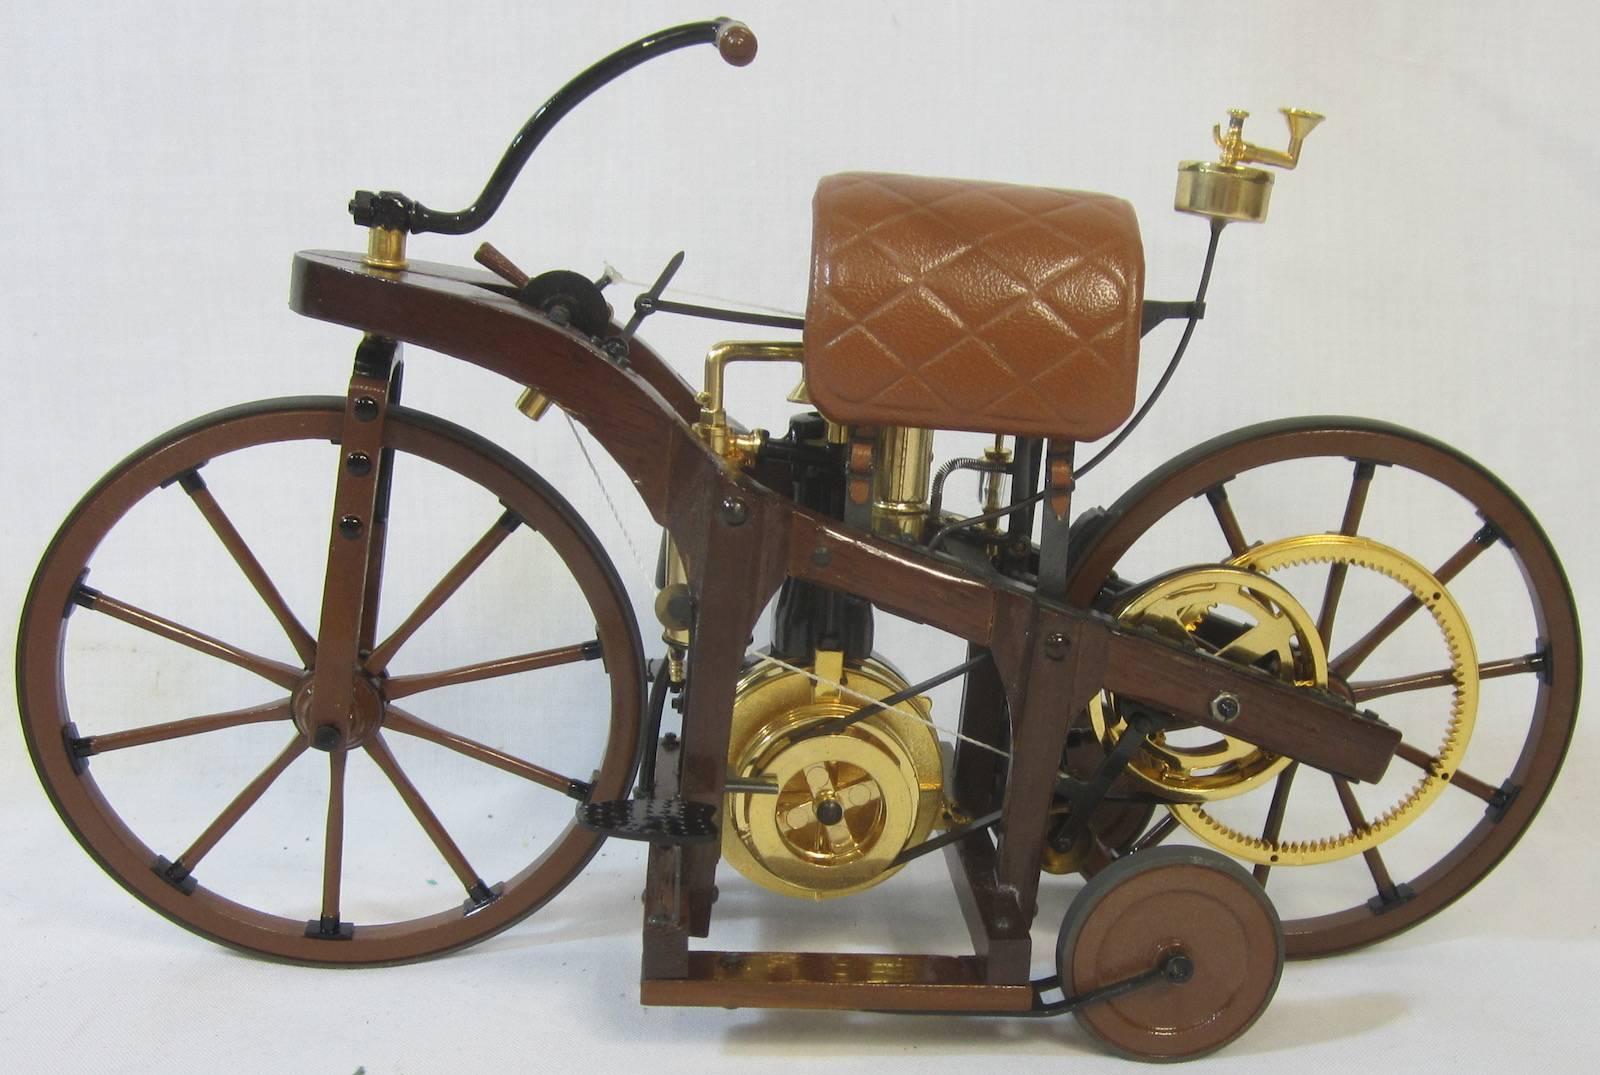 Highly detailed, replica veteran steam powered motor cycle in a glass display cabinet, motor cycle measures approximately 20cm long, 
cabinet 42 x 29 x 27cm high.